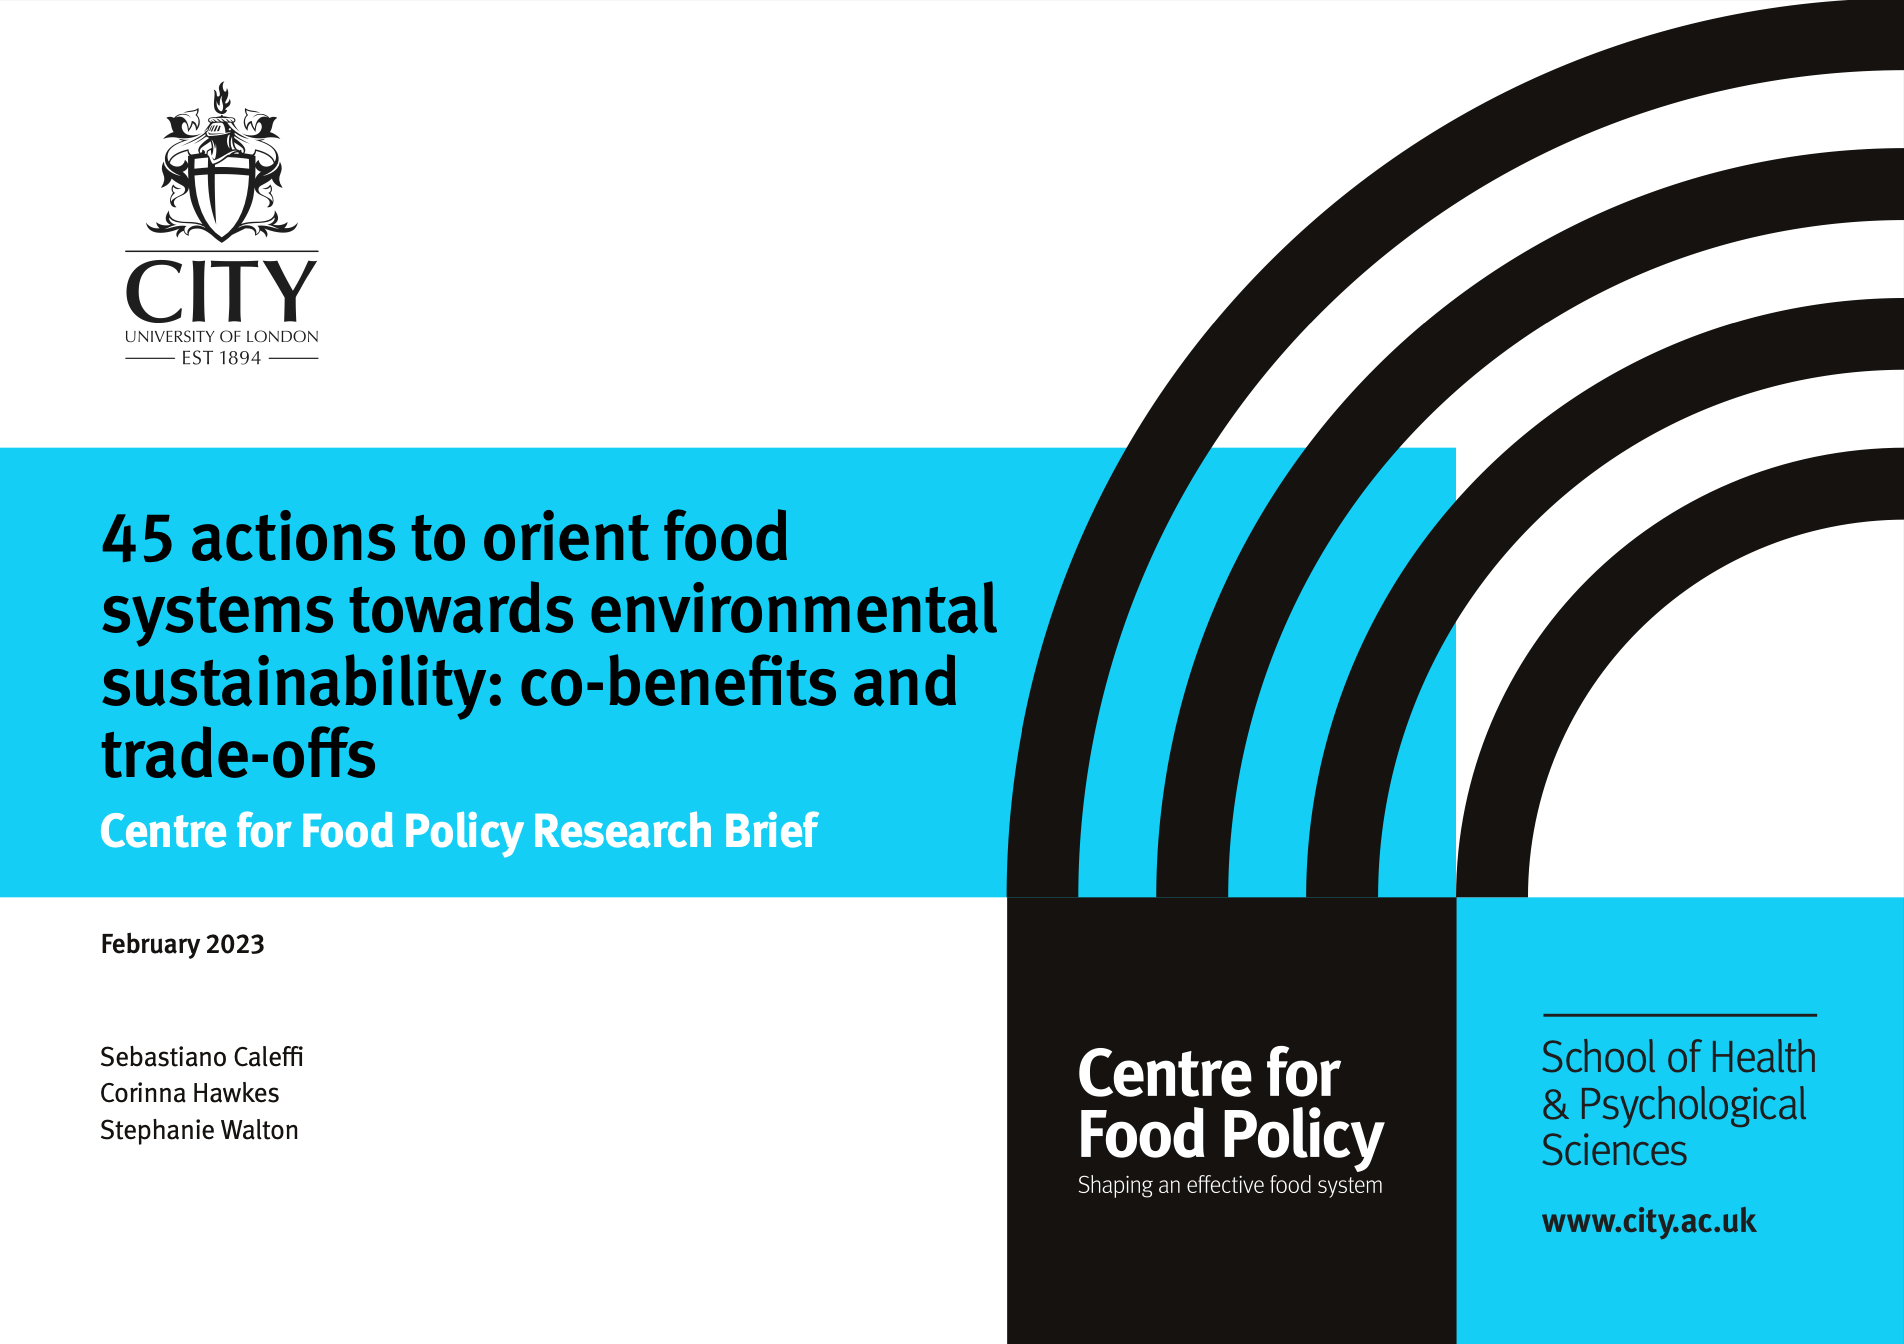 45 Actions to Orient Food Systems Towards Environmental Sustainability: Co-benefits and Trade-offs